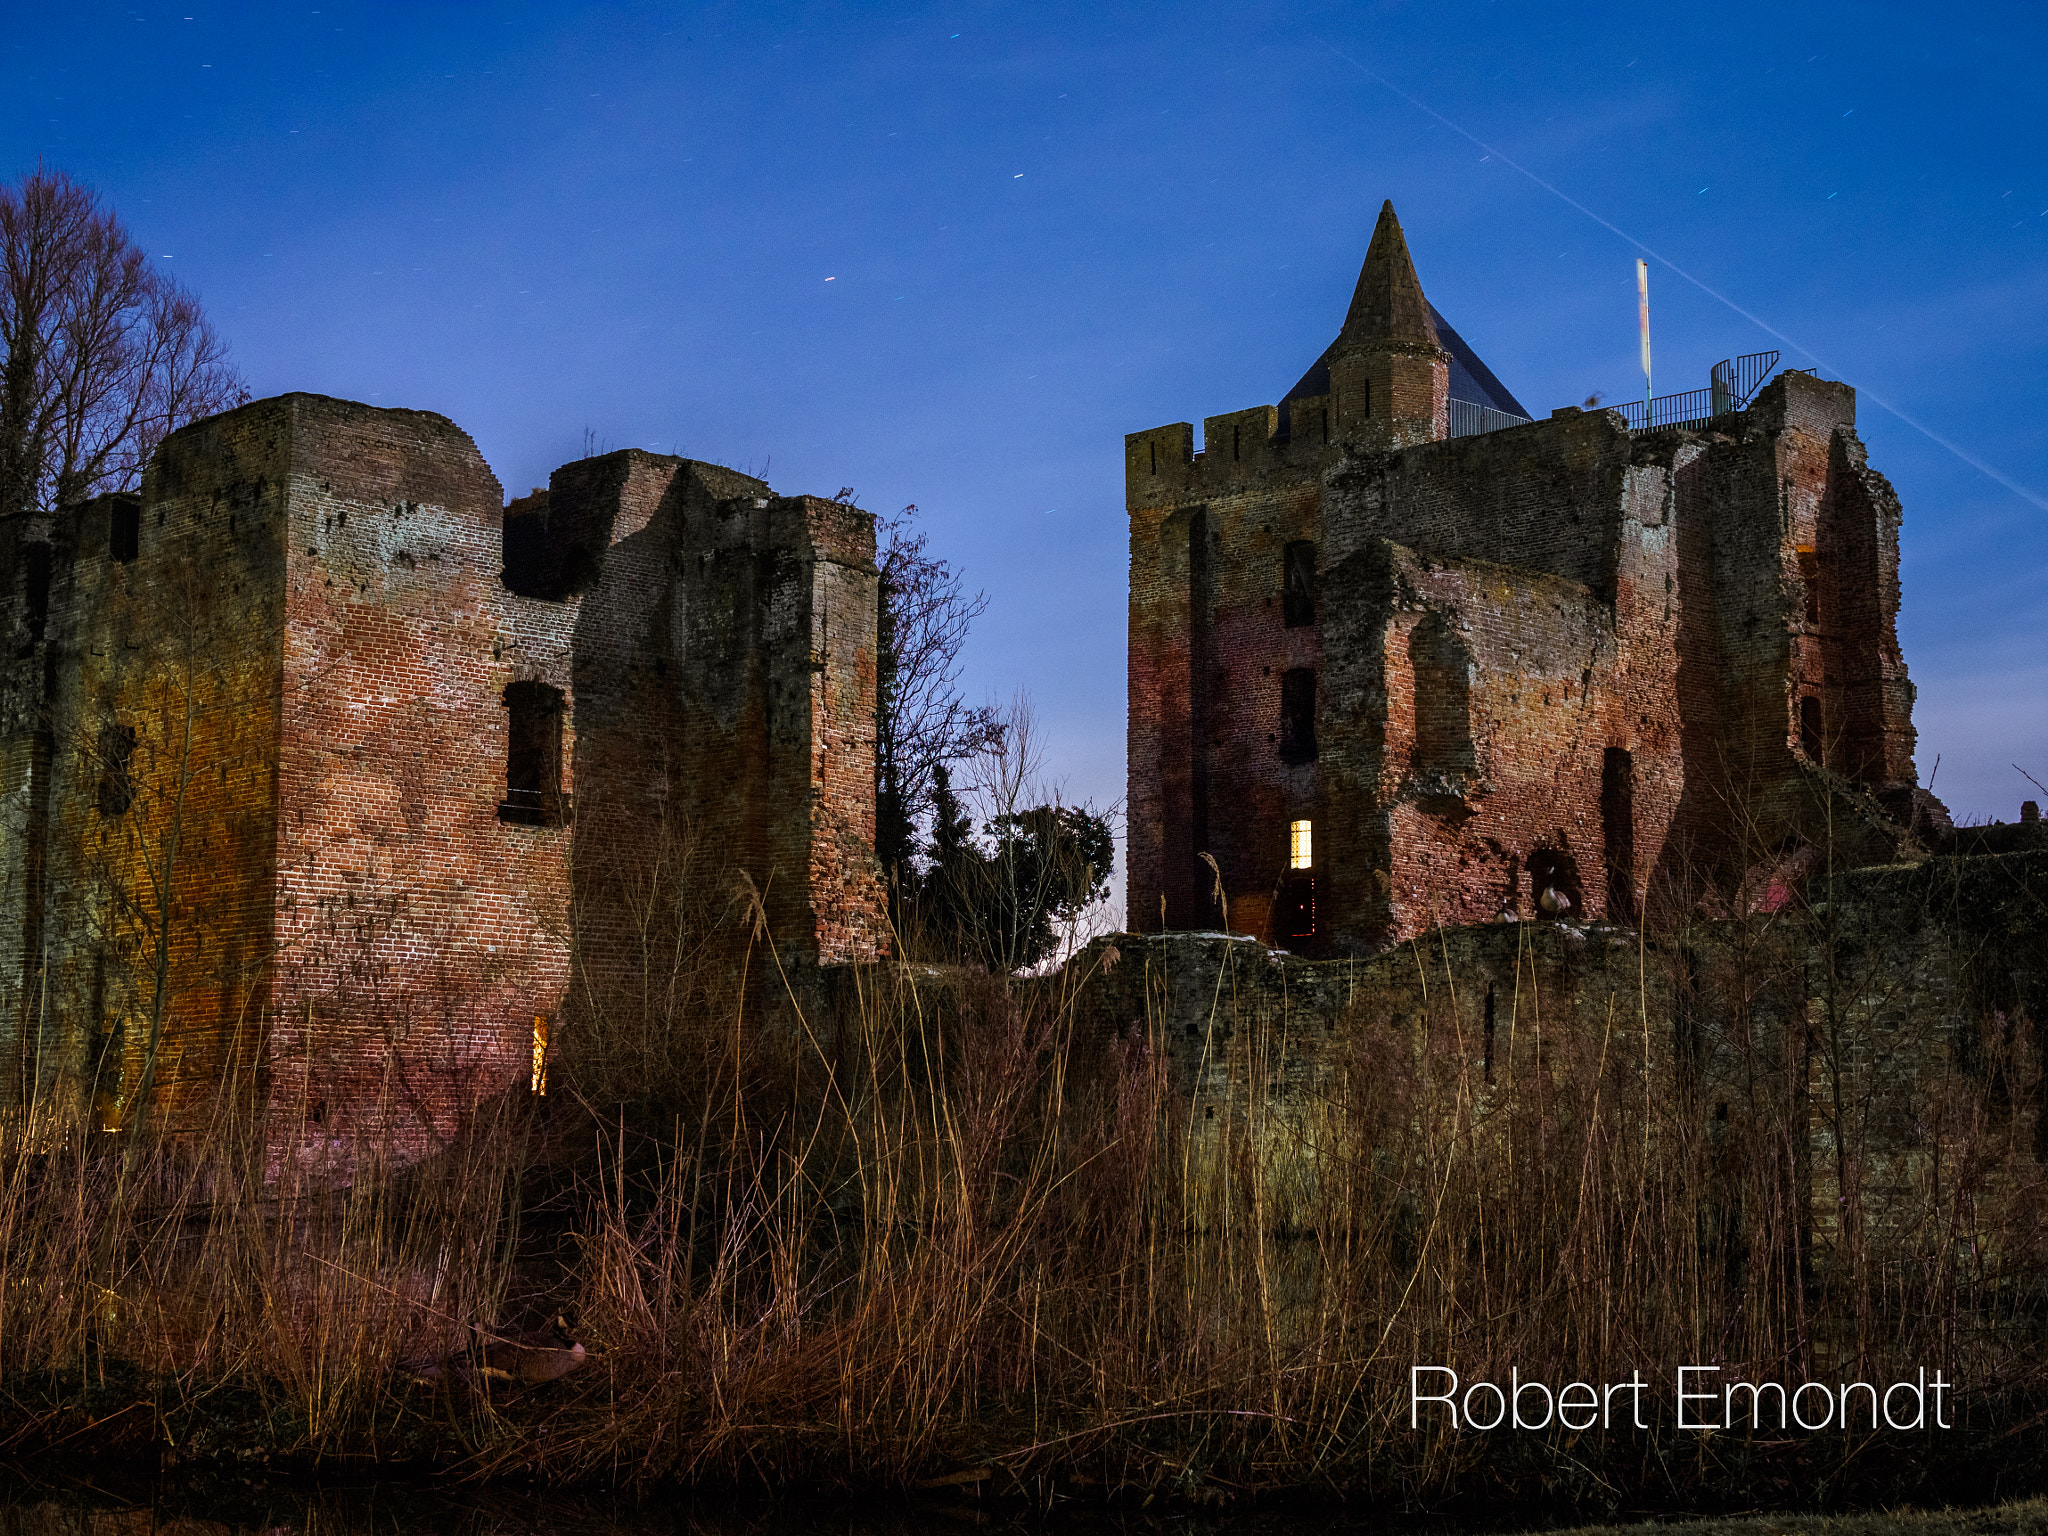 Olympus OM-D E-M10 sample photo. Ruins by night photography